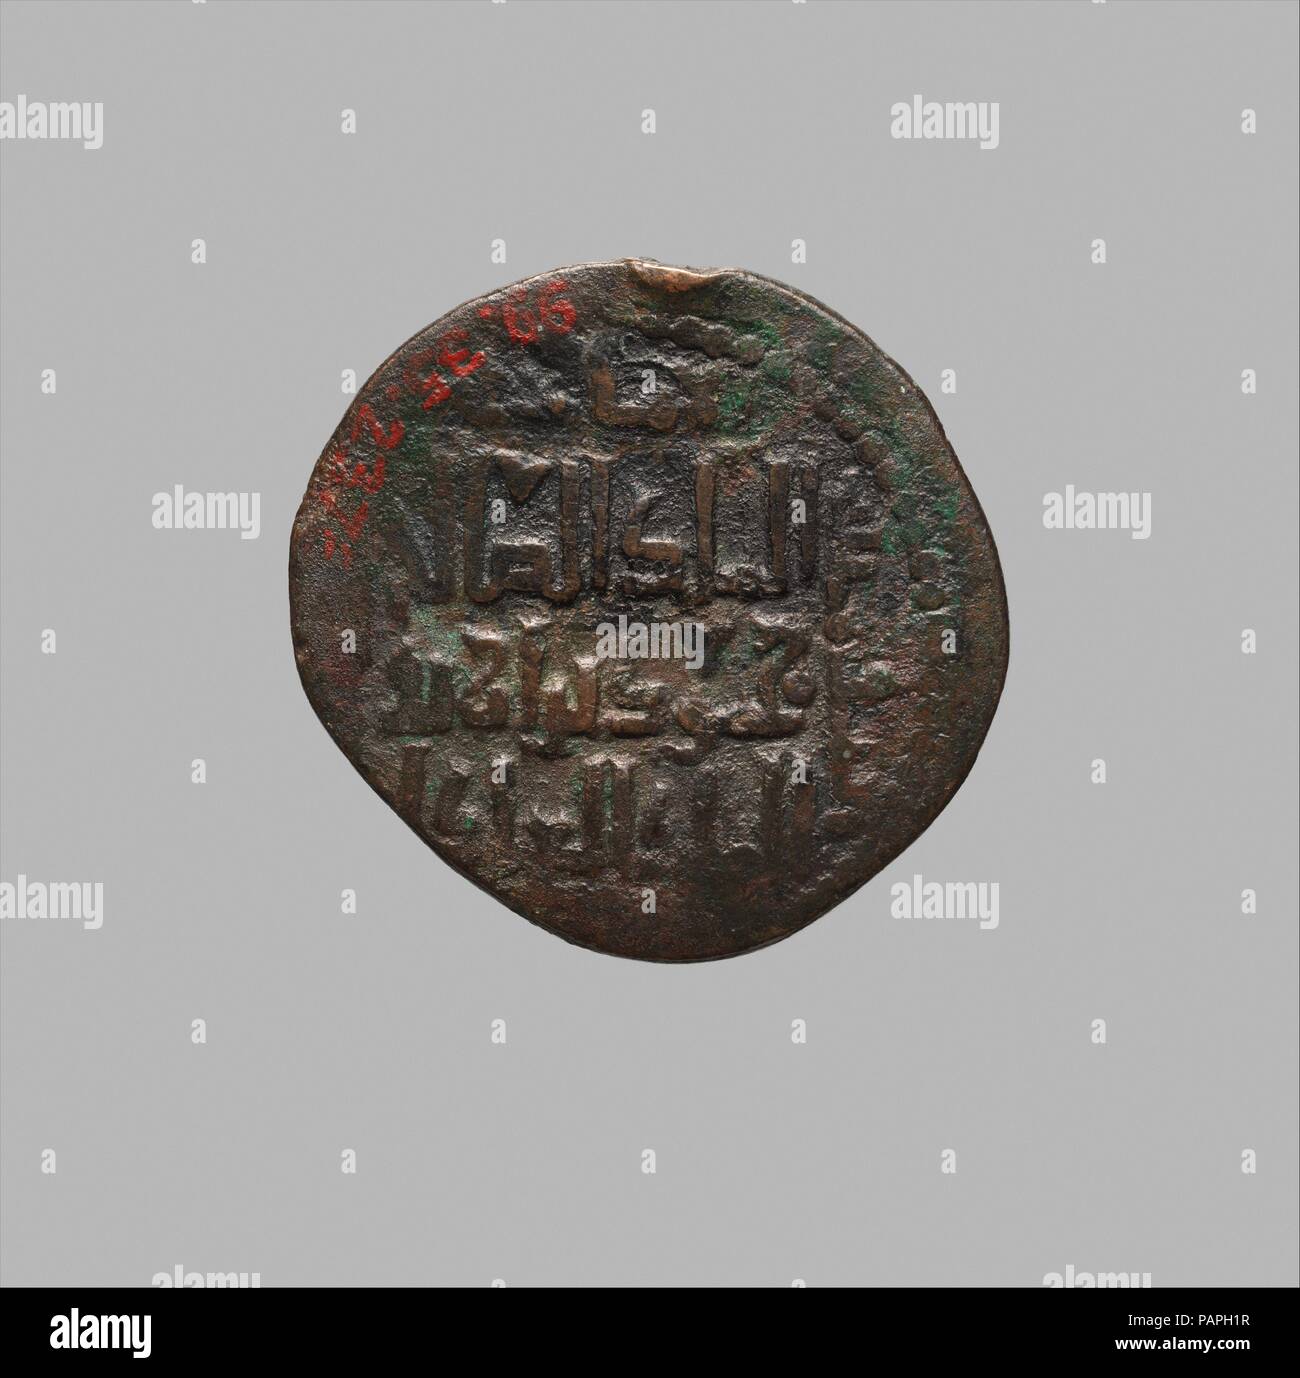 Dirham of Nasir al-Din Mahmud (r. 1201-22): Double-Headed Bird of Prey. Dimensions: Diam. 1 1/8 in. (2.9 cm)  D. 1/16 in. (0.2 cm)  Wt. 0.4 oz. (11.3 g). Date: dated A.H. 615/ A.D. 1218-19.  The period from the mid-twelfth to the mid-thirteenth century witnessed a growing regional economy in the Jazira which led to a profusion of unusually large and heavy copper coins depicting a myriad of figural imagery. Their large size (approx. 2.4-3 cm), the existence of figural imagery, and certain themes recall Byzantine copper coins which were used as petty coinage and which this new coinage complement Stock Photo